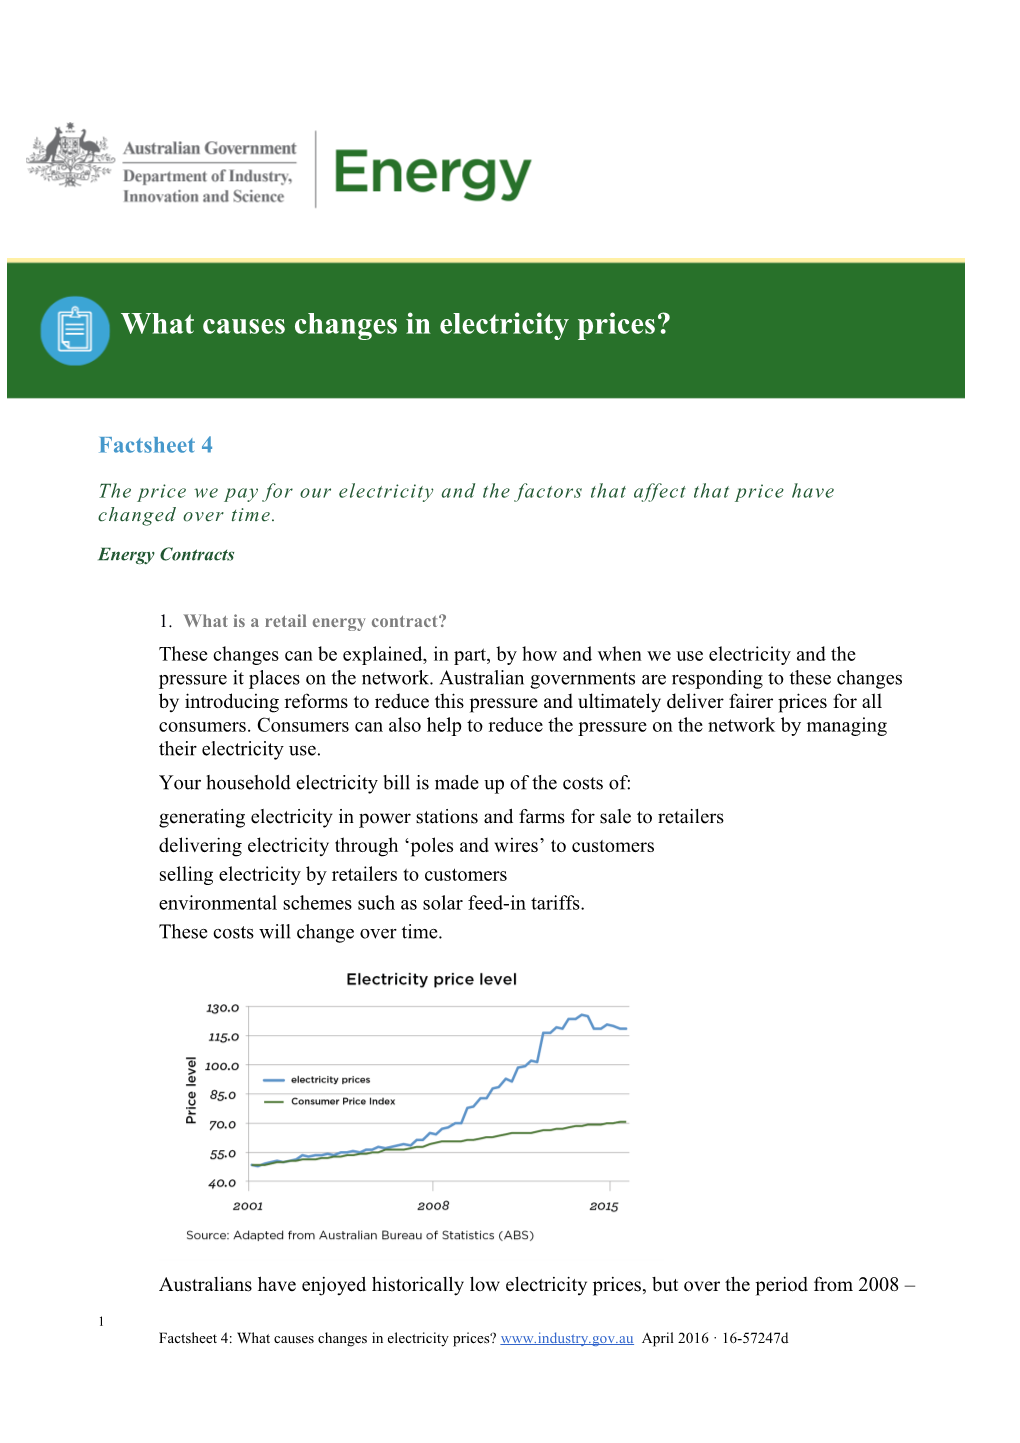 Factsheet 4: What Causes Changes in Electricity Prices?